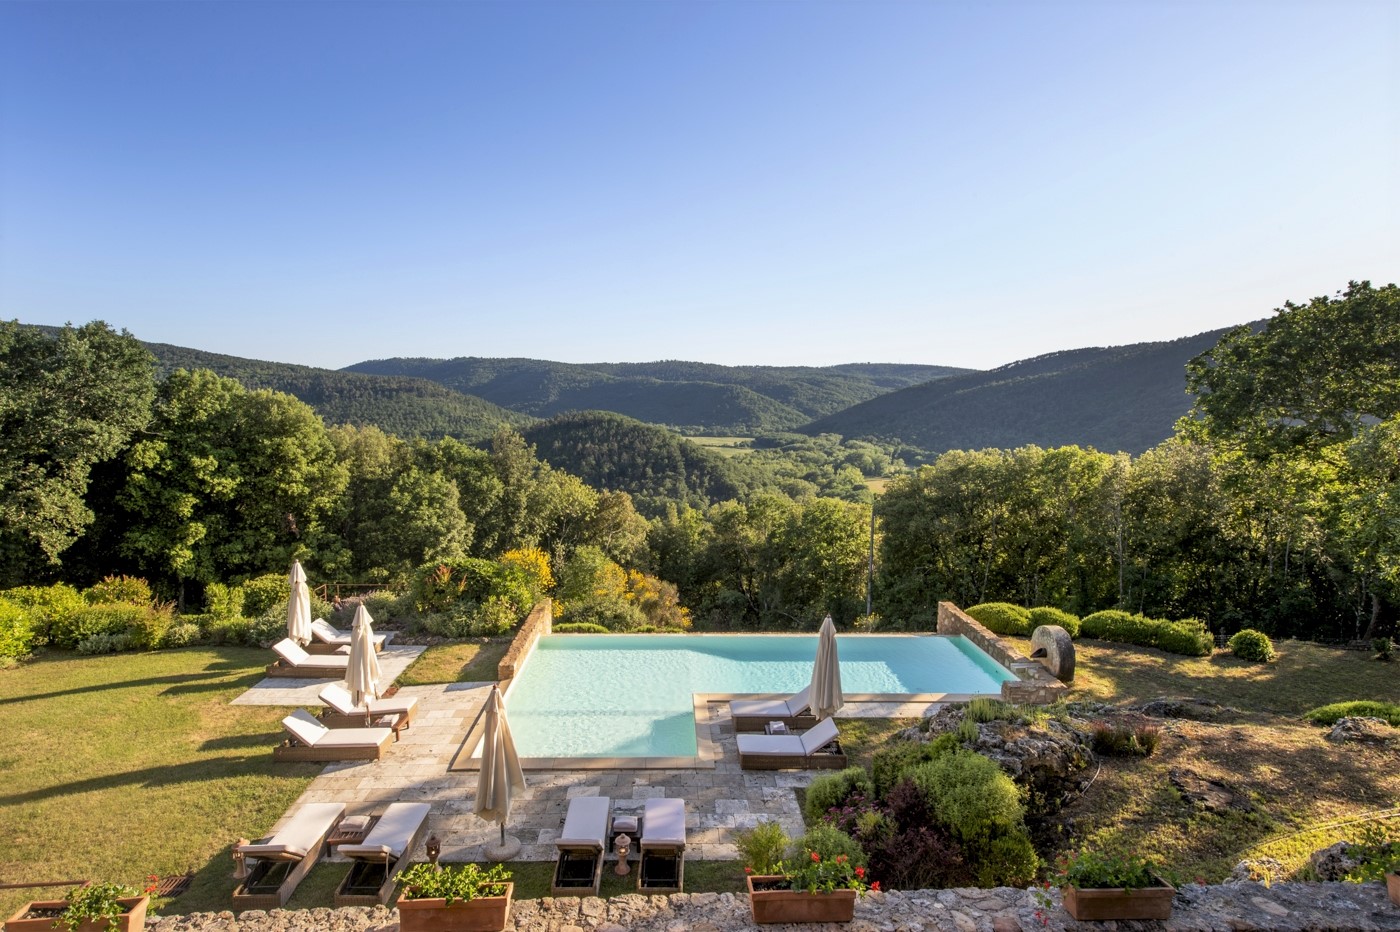 View of infinity pool with sun loungers, umbrellas, flowers and view at La Gavelli in Tuscany, Italy